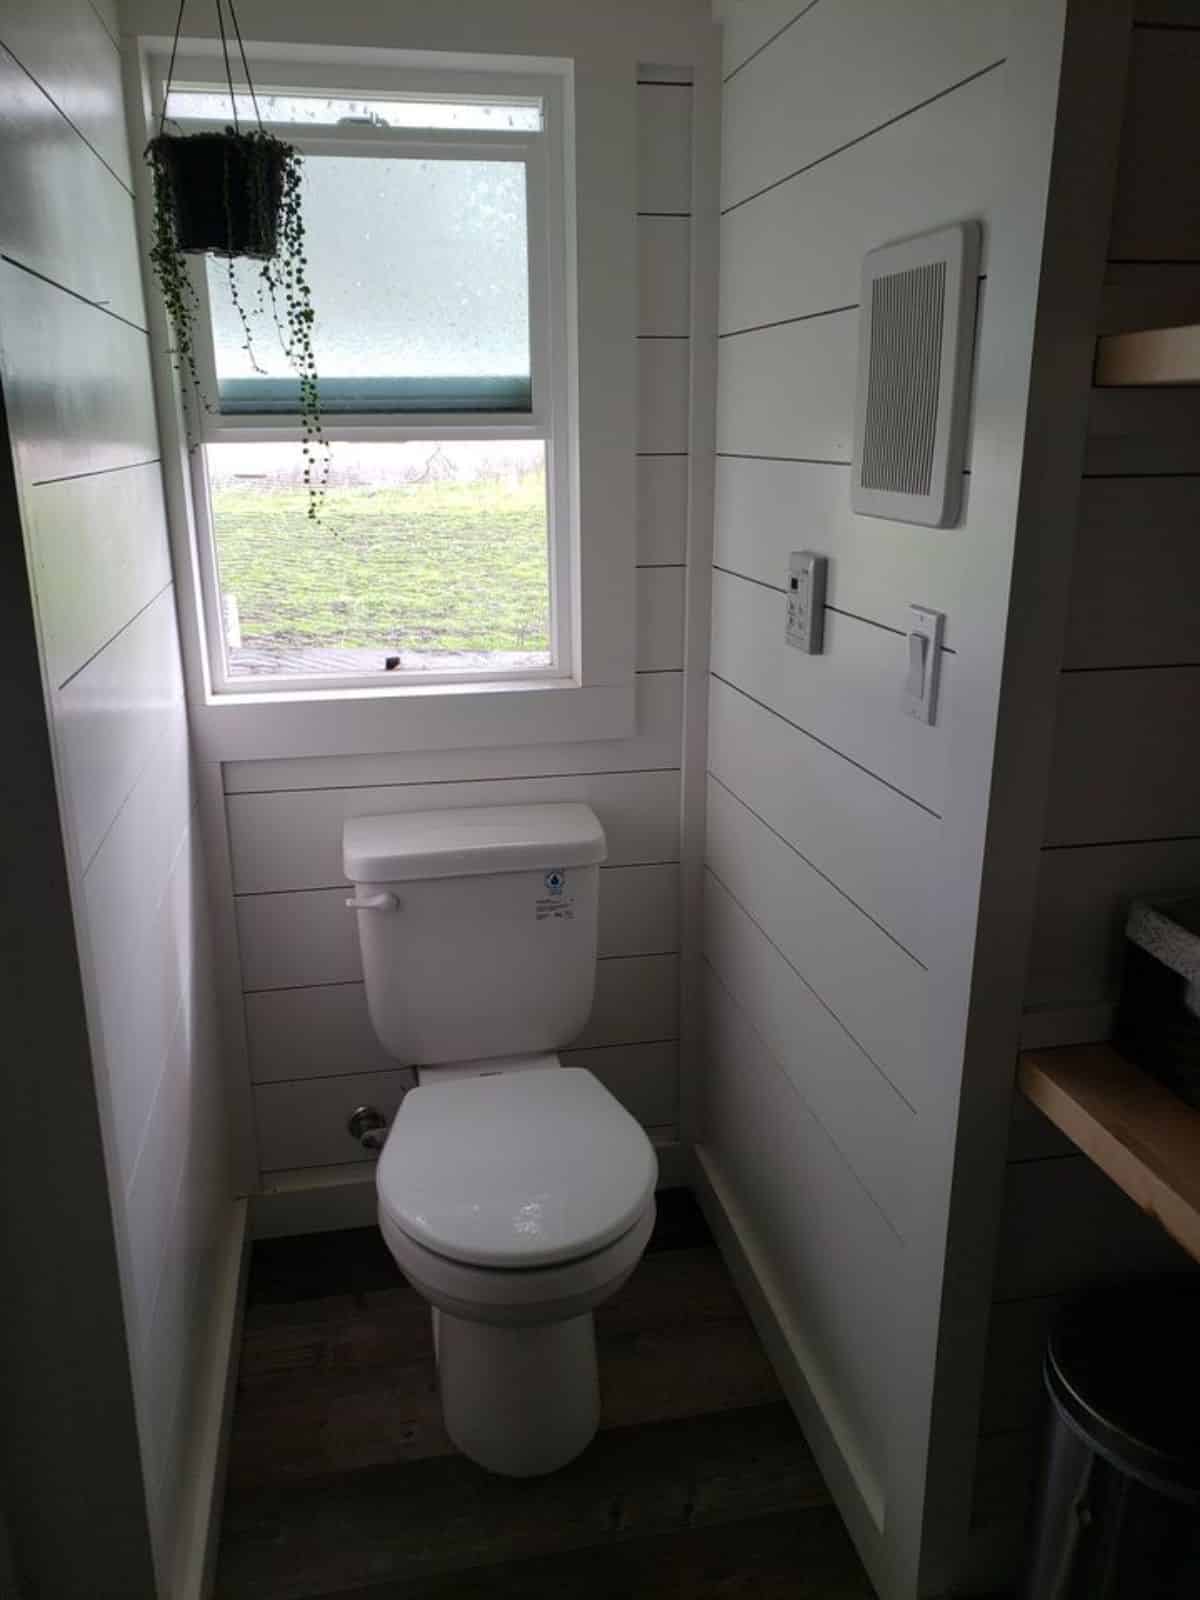 standard convertible to composting toilet toilet in bathroom